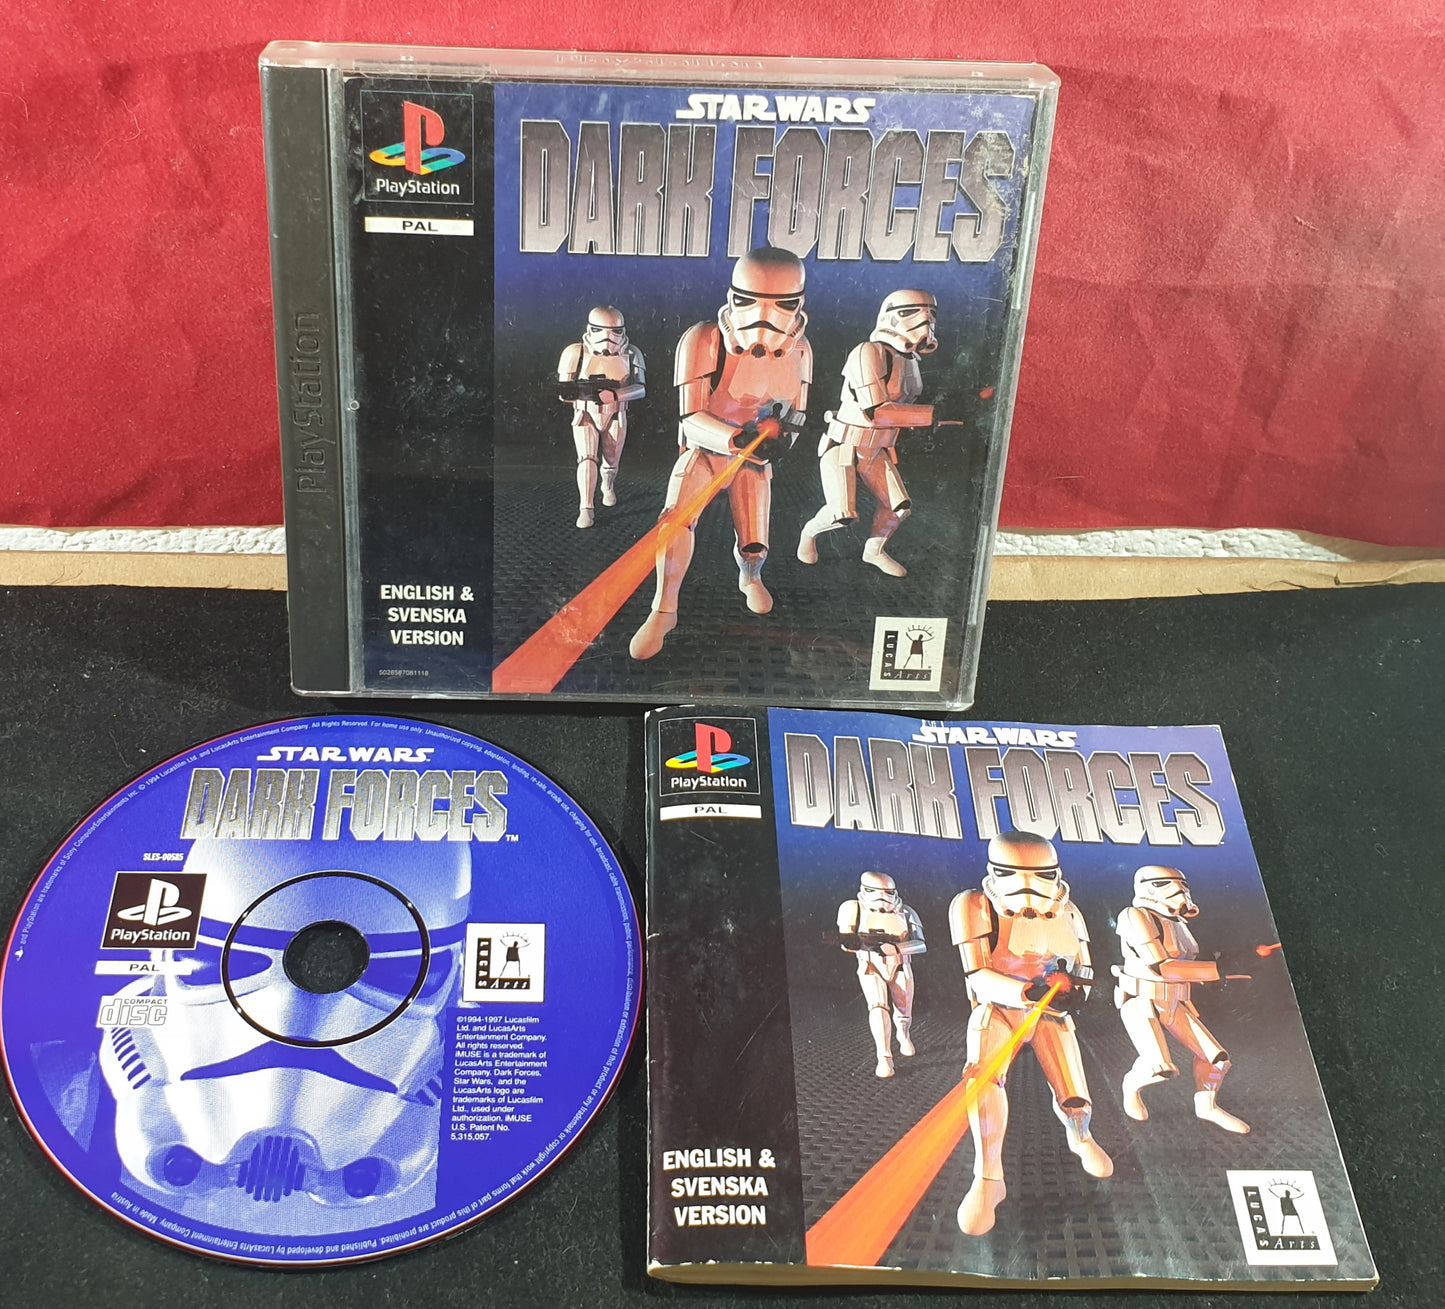 Star Wars Dark Forces Sony Playstation 1 (PS1) Game